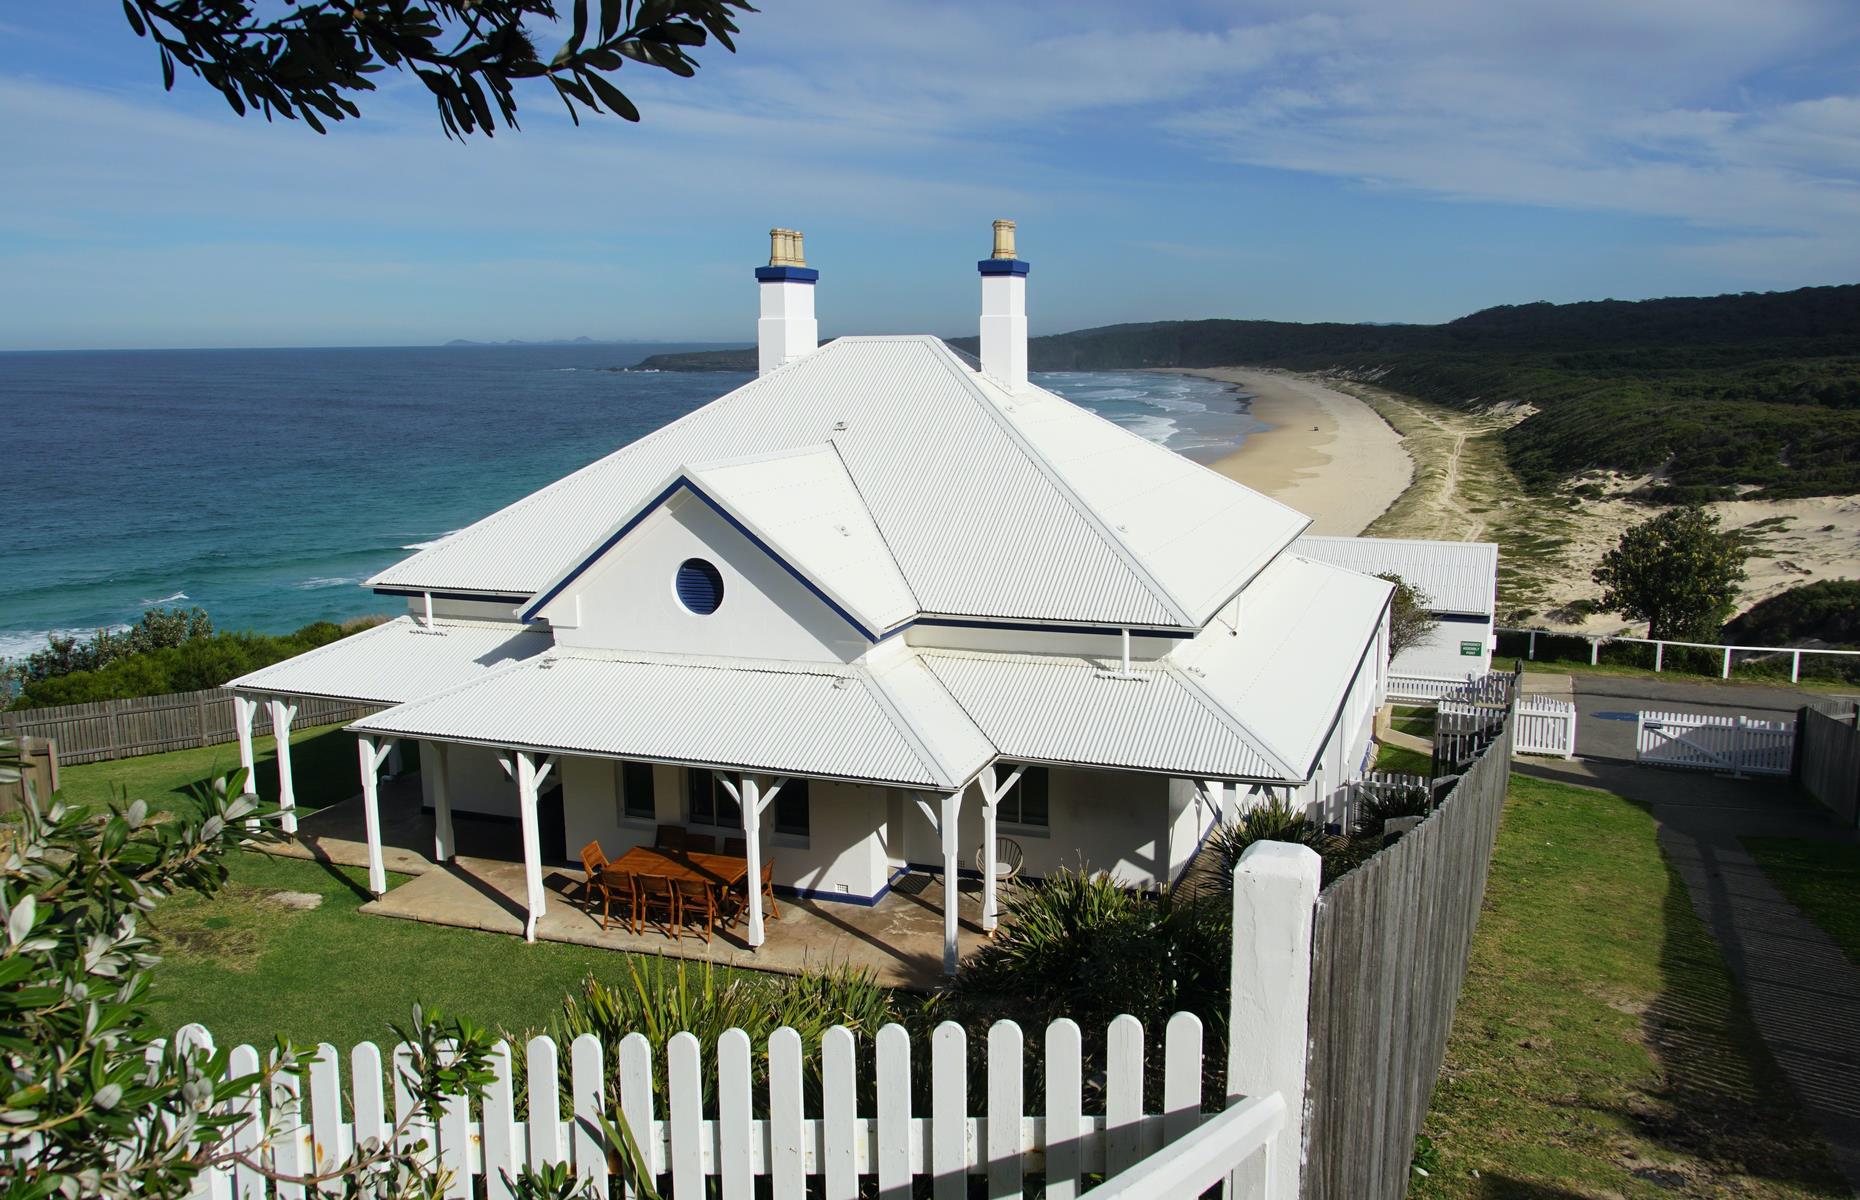 <p>Set on the mid-north coast of New South Wales, Pacific Palms is a collection of small and sleepy coastal villages, lakes, forest and spectacular beaches (standouts are Boomerang Beach, Blueys Beach and Elizabeth Beach). Soak in the views from 19th-century Sugarloaf Point Lighthouse (pictured), east of Seal Rocks village. You can stay here too. Catch the waves and go snorkelling at Blueys Beach or set off on a hike from Elizabeth Bay into Booti Booti National Park. You can follow a walking trail at the beach’s northern end towards Seven Mile beach, a noted whale-watching spot in winter.</p>